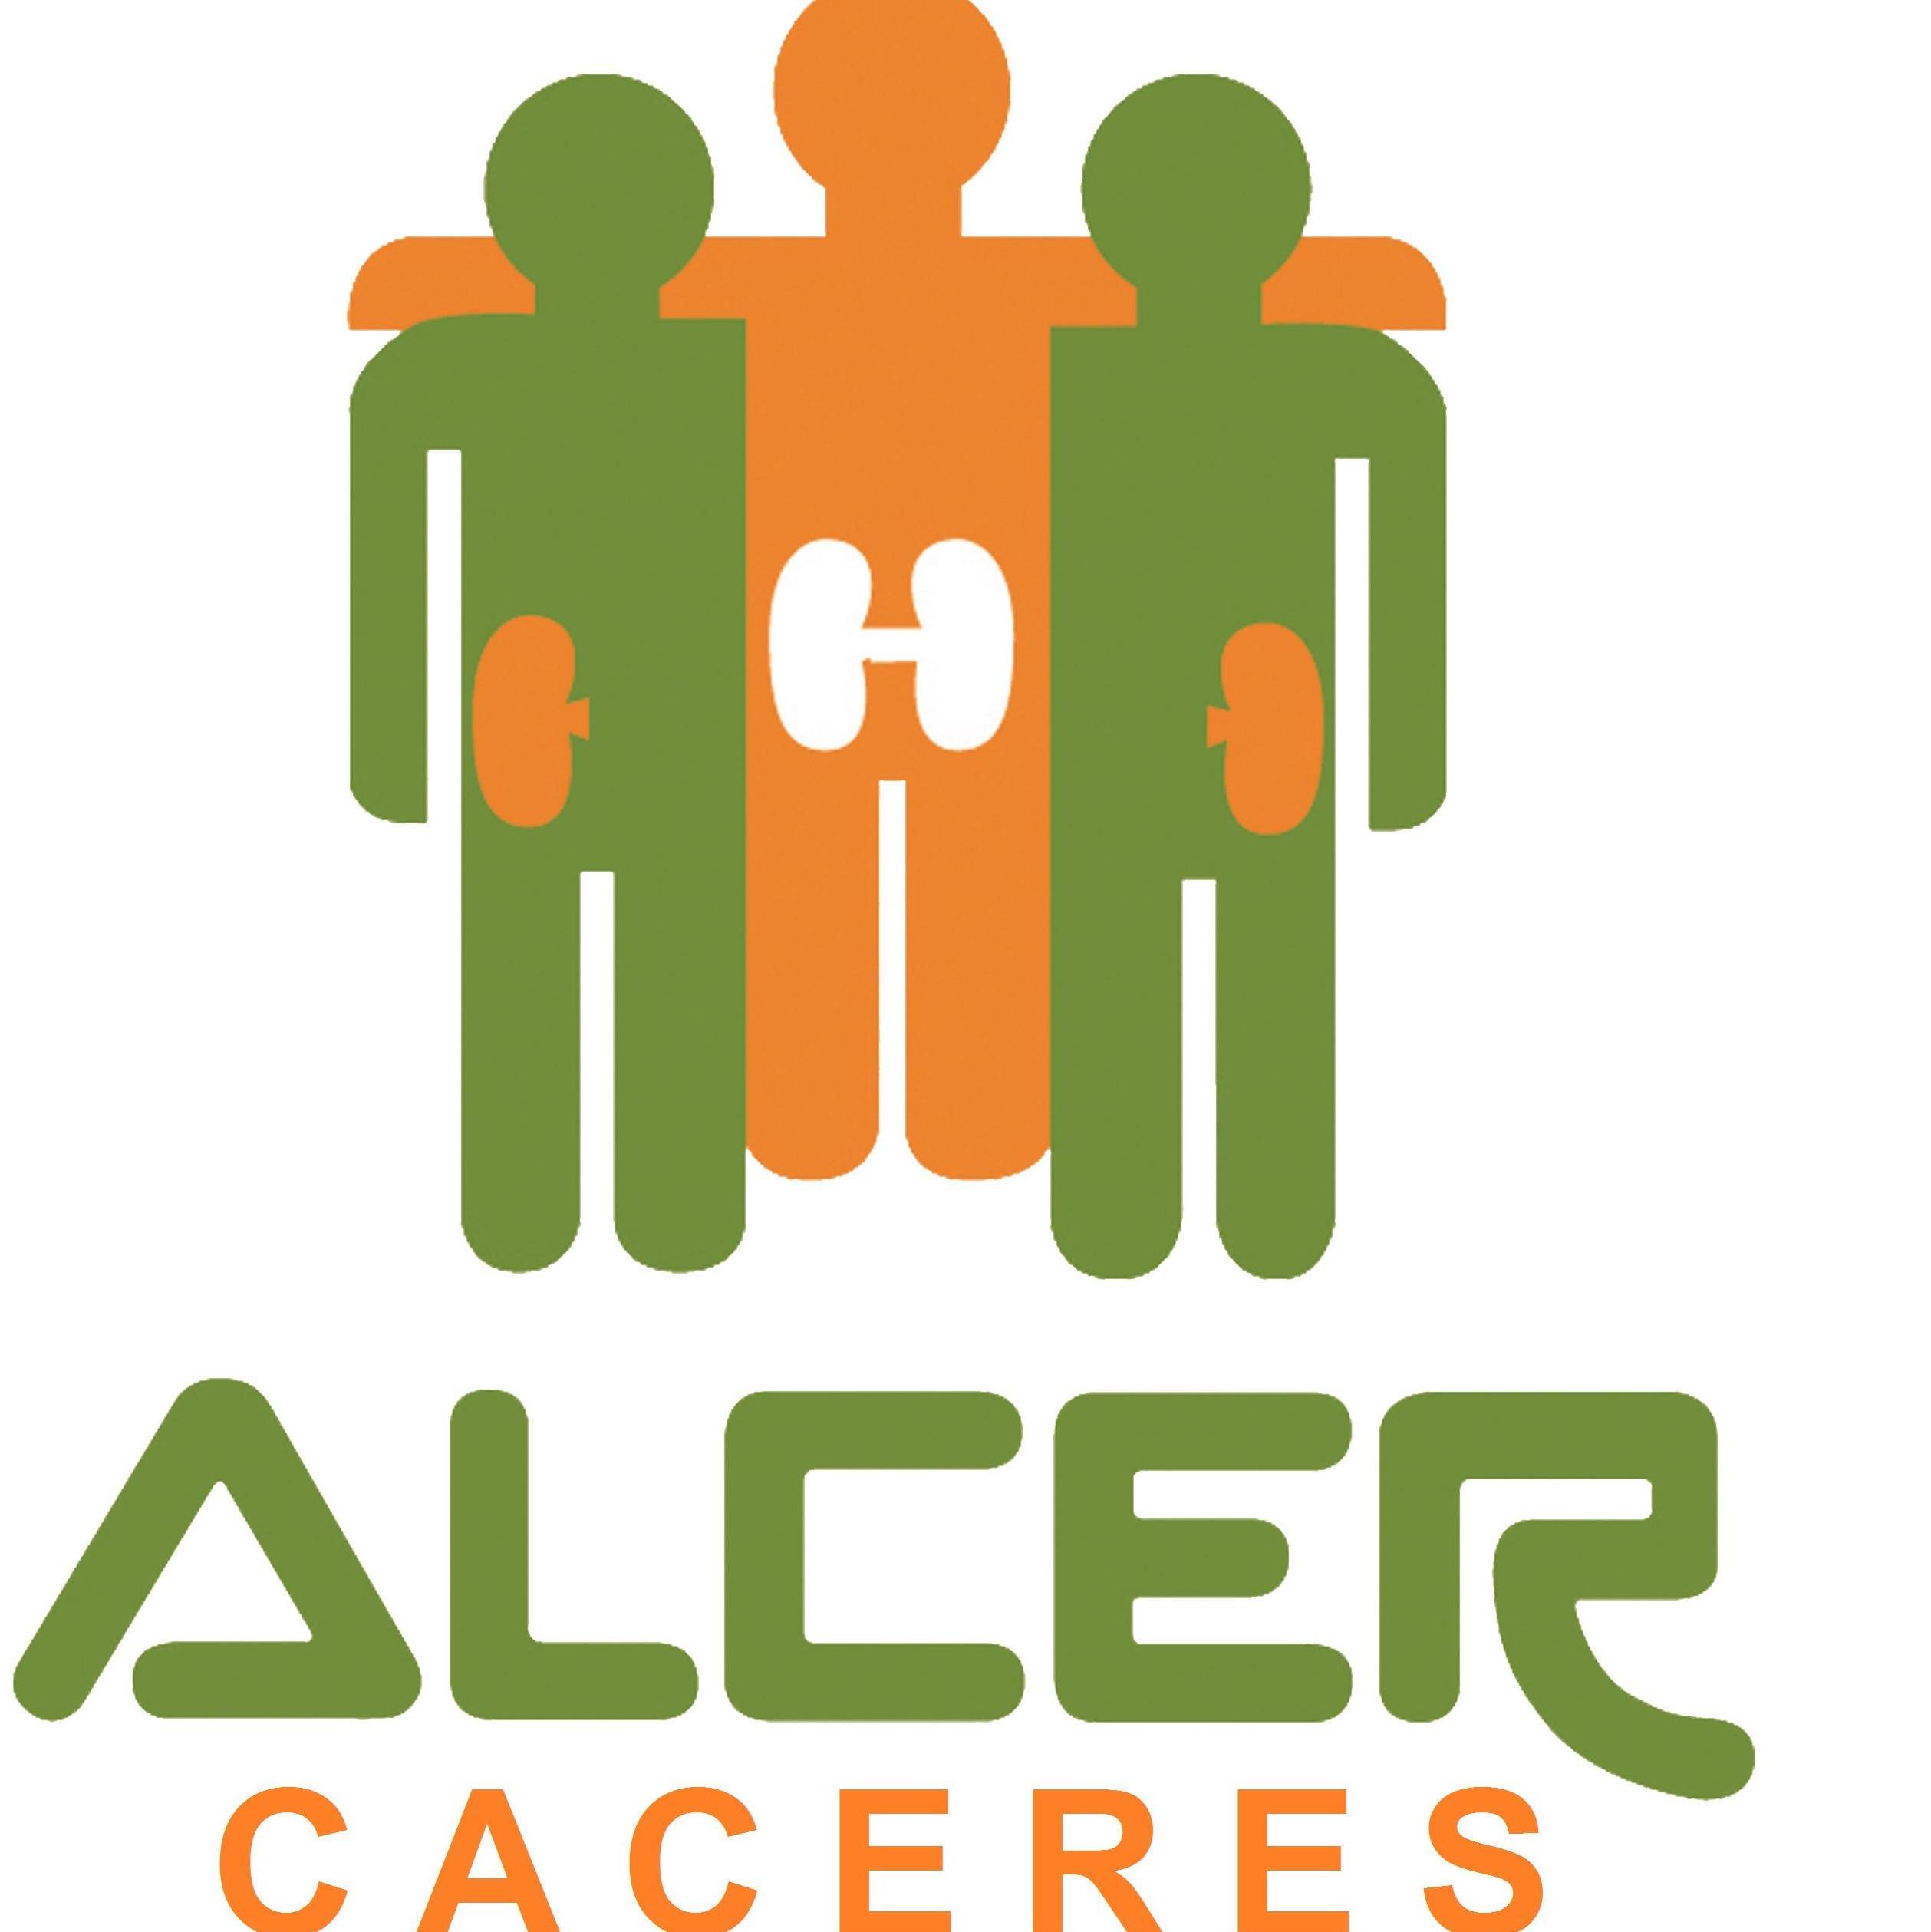 ALCER Cáceres Profile, news, ratings and communication